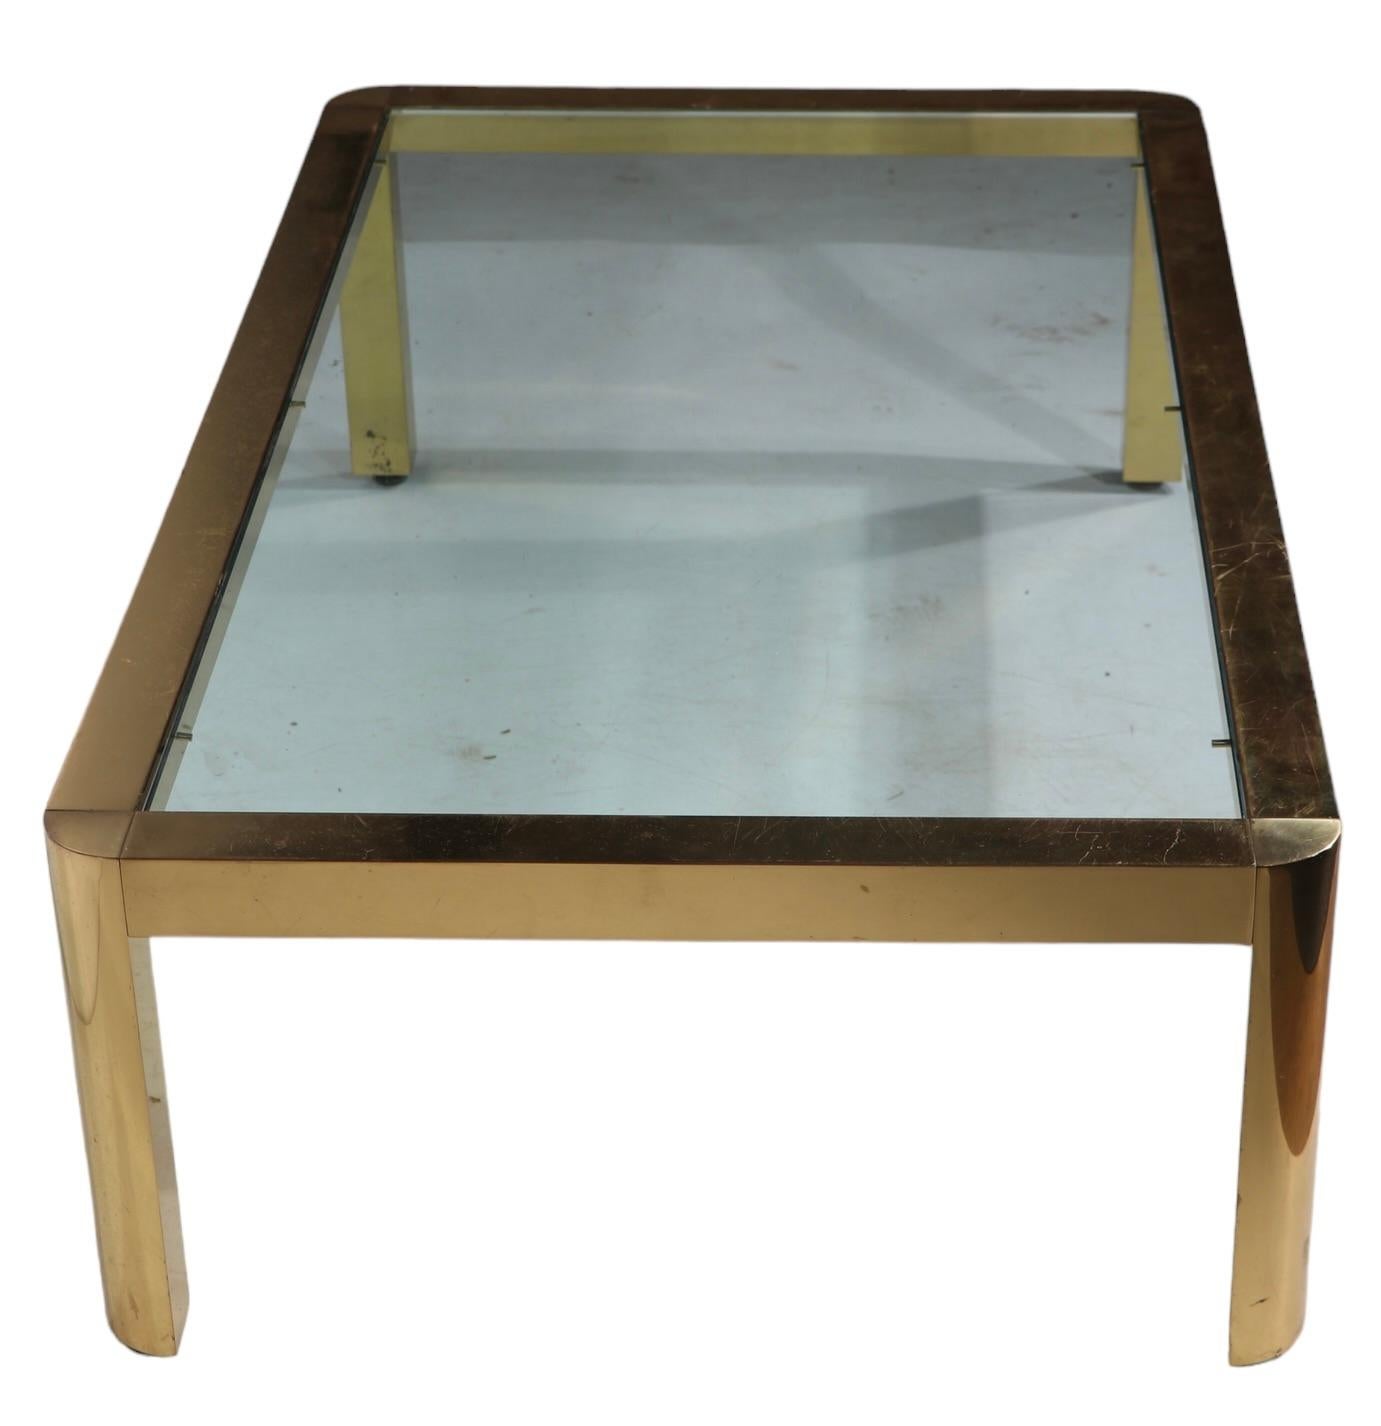 Postmodern Hollywood Regency Brass and Glass Coffee Table Made in Italy c 1970's For Sale 2